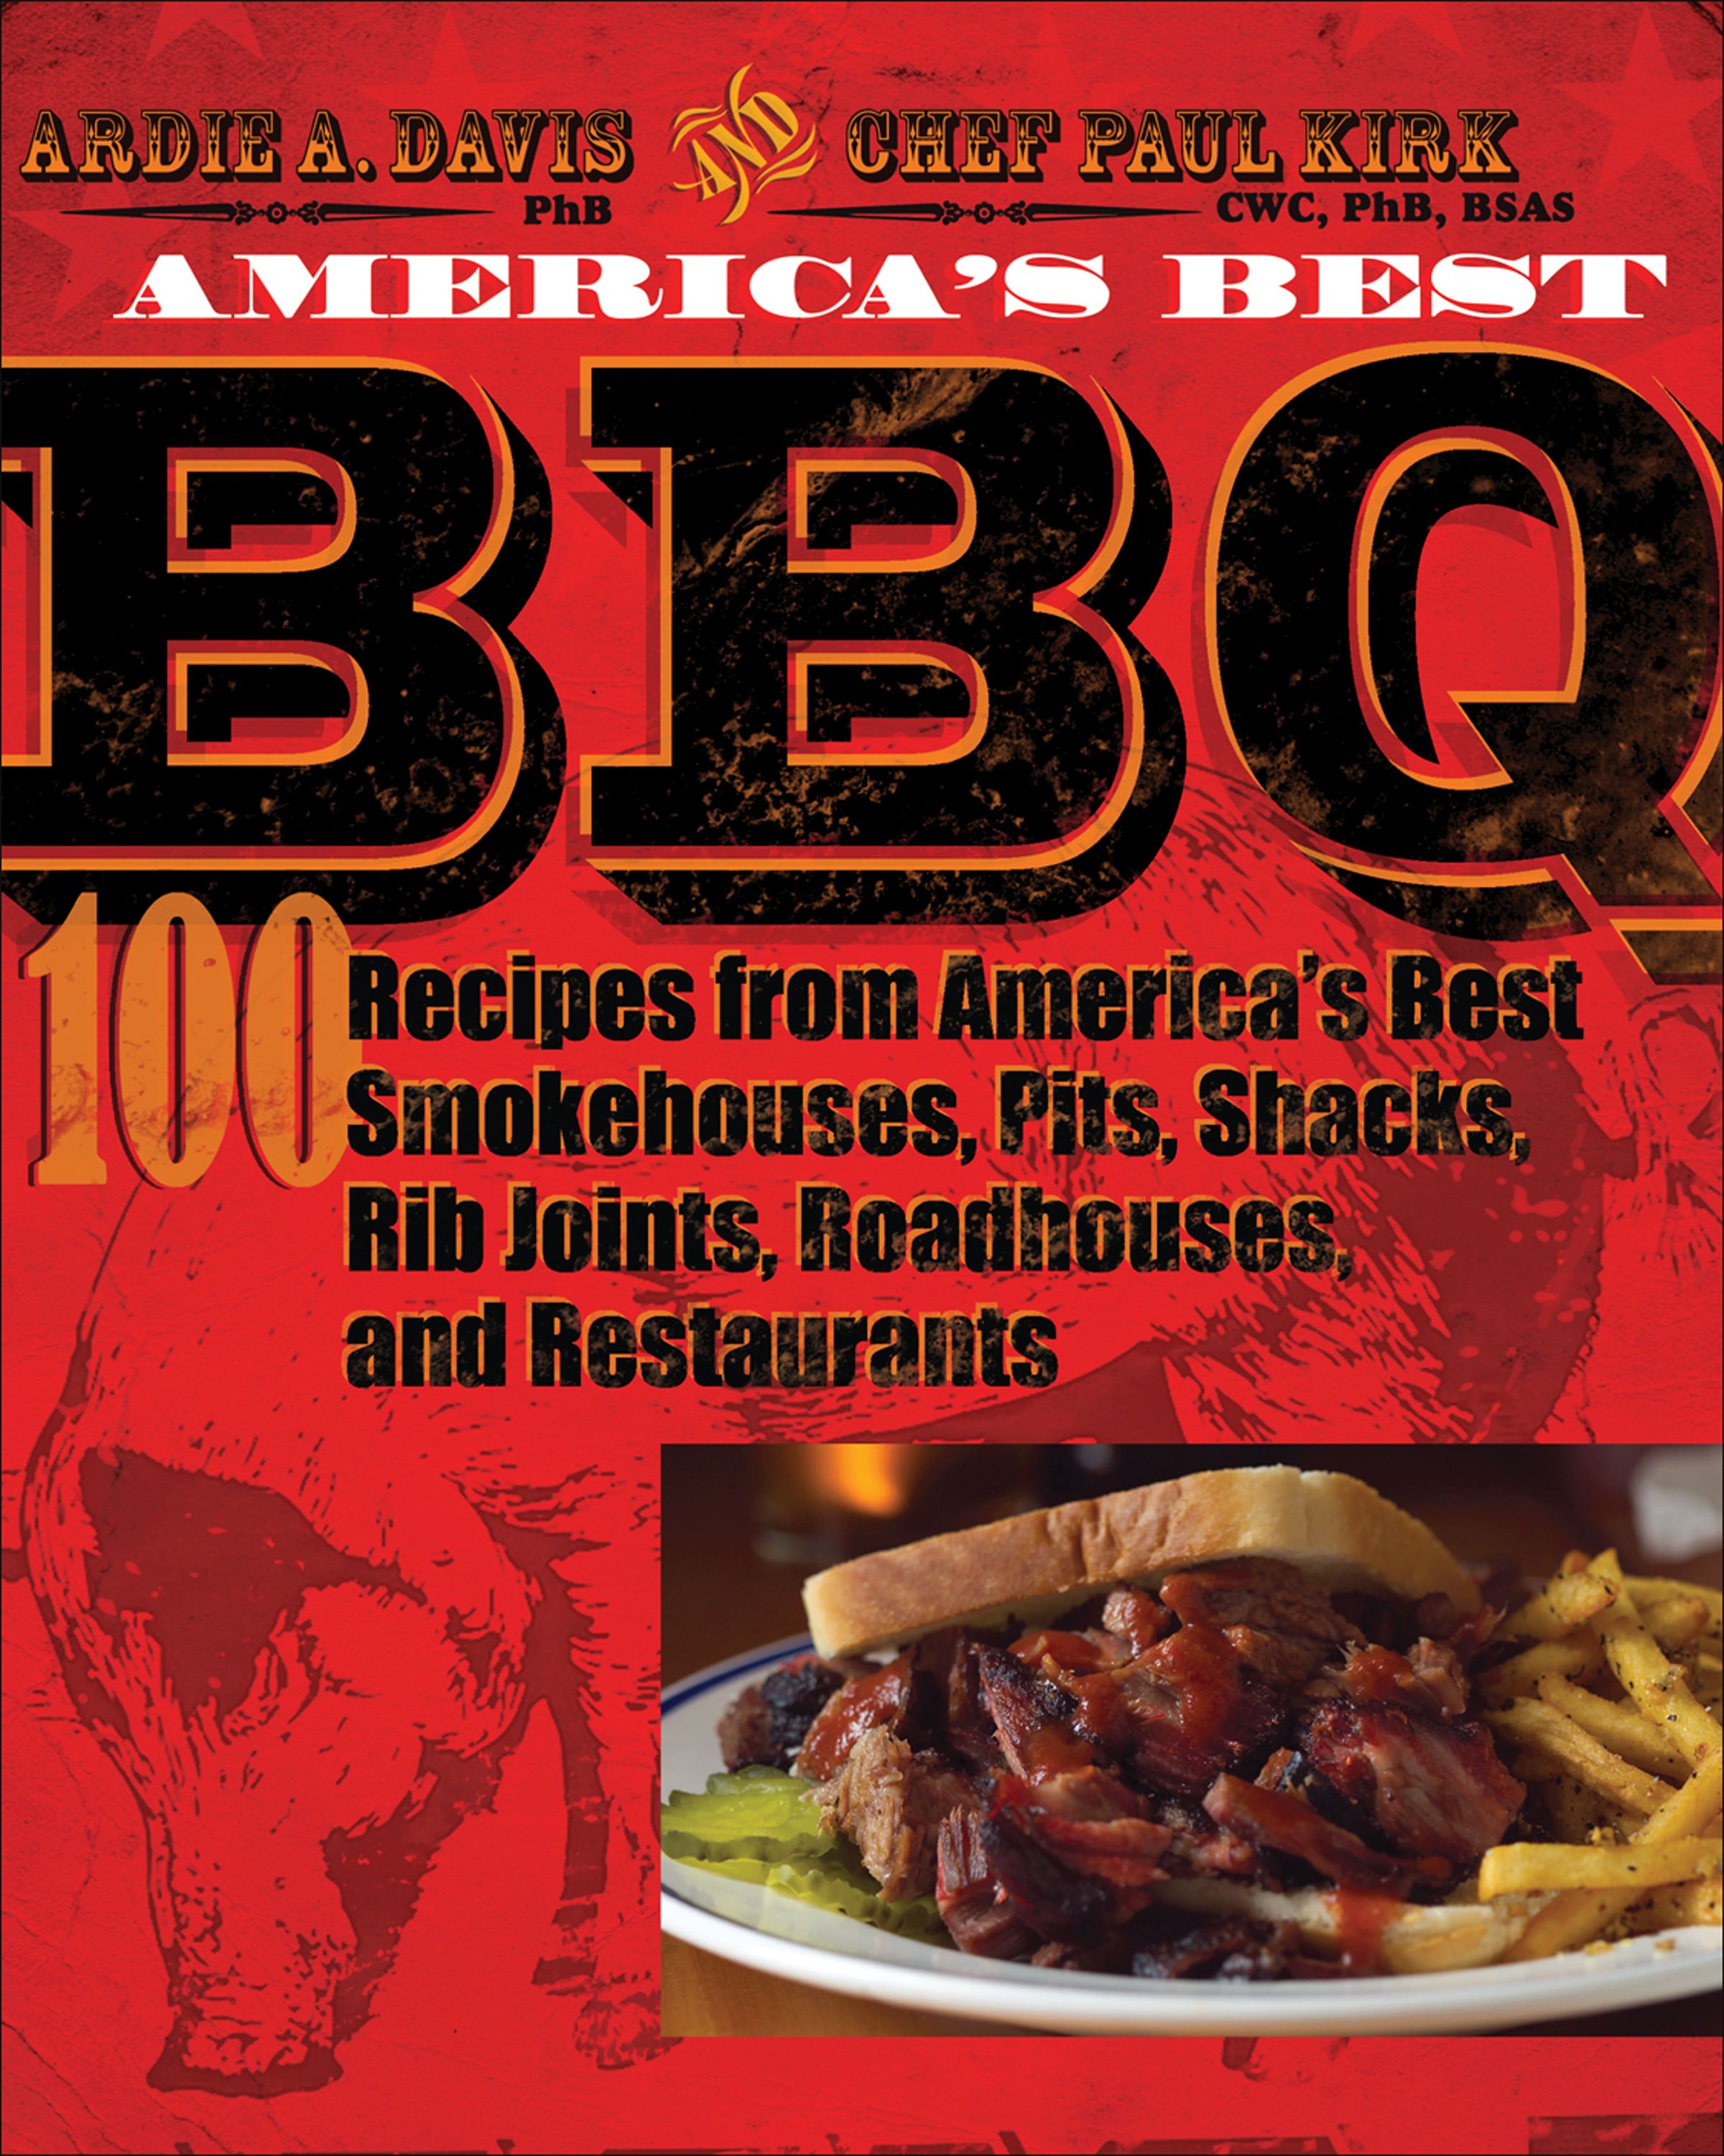 America's Best BBQ : 100 Recipes from America's Best Smokehouses, Pits, Shacks, Rib Joints, Roadhouses, and Restaurants (Paperback) - image 1 of 1